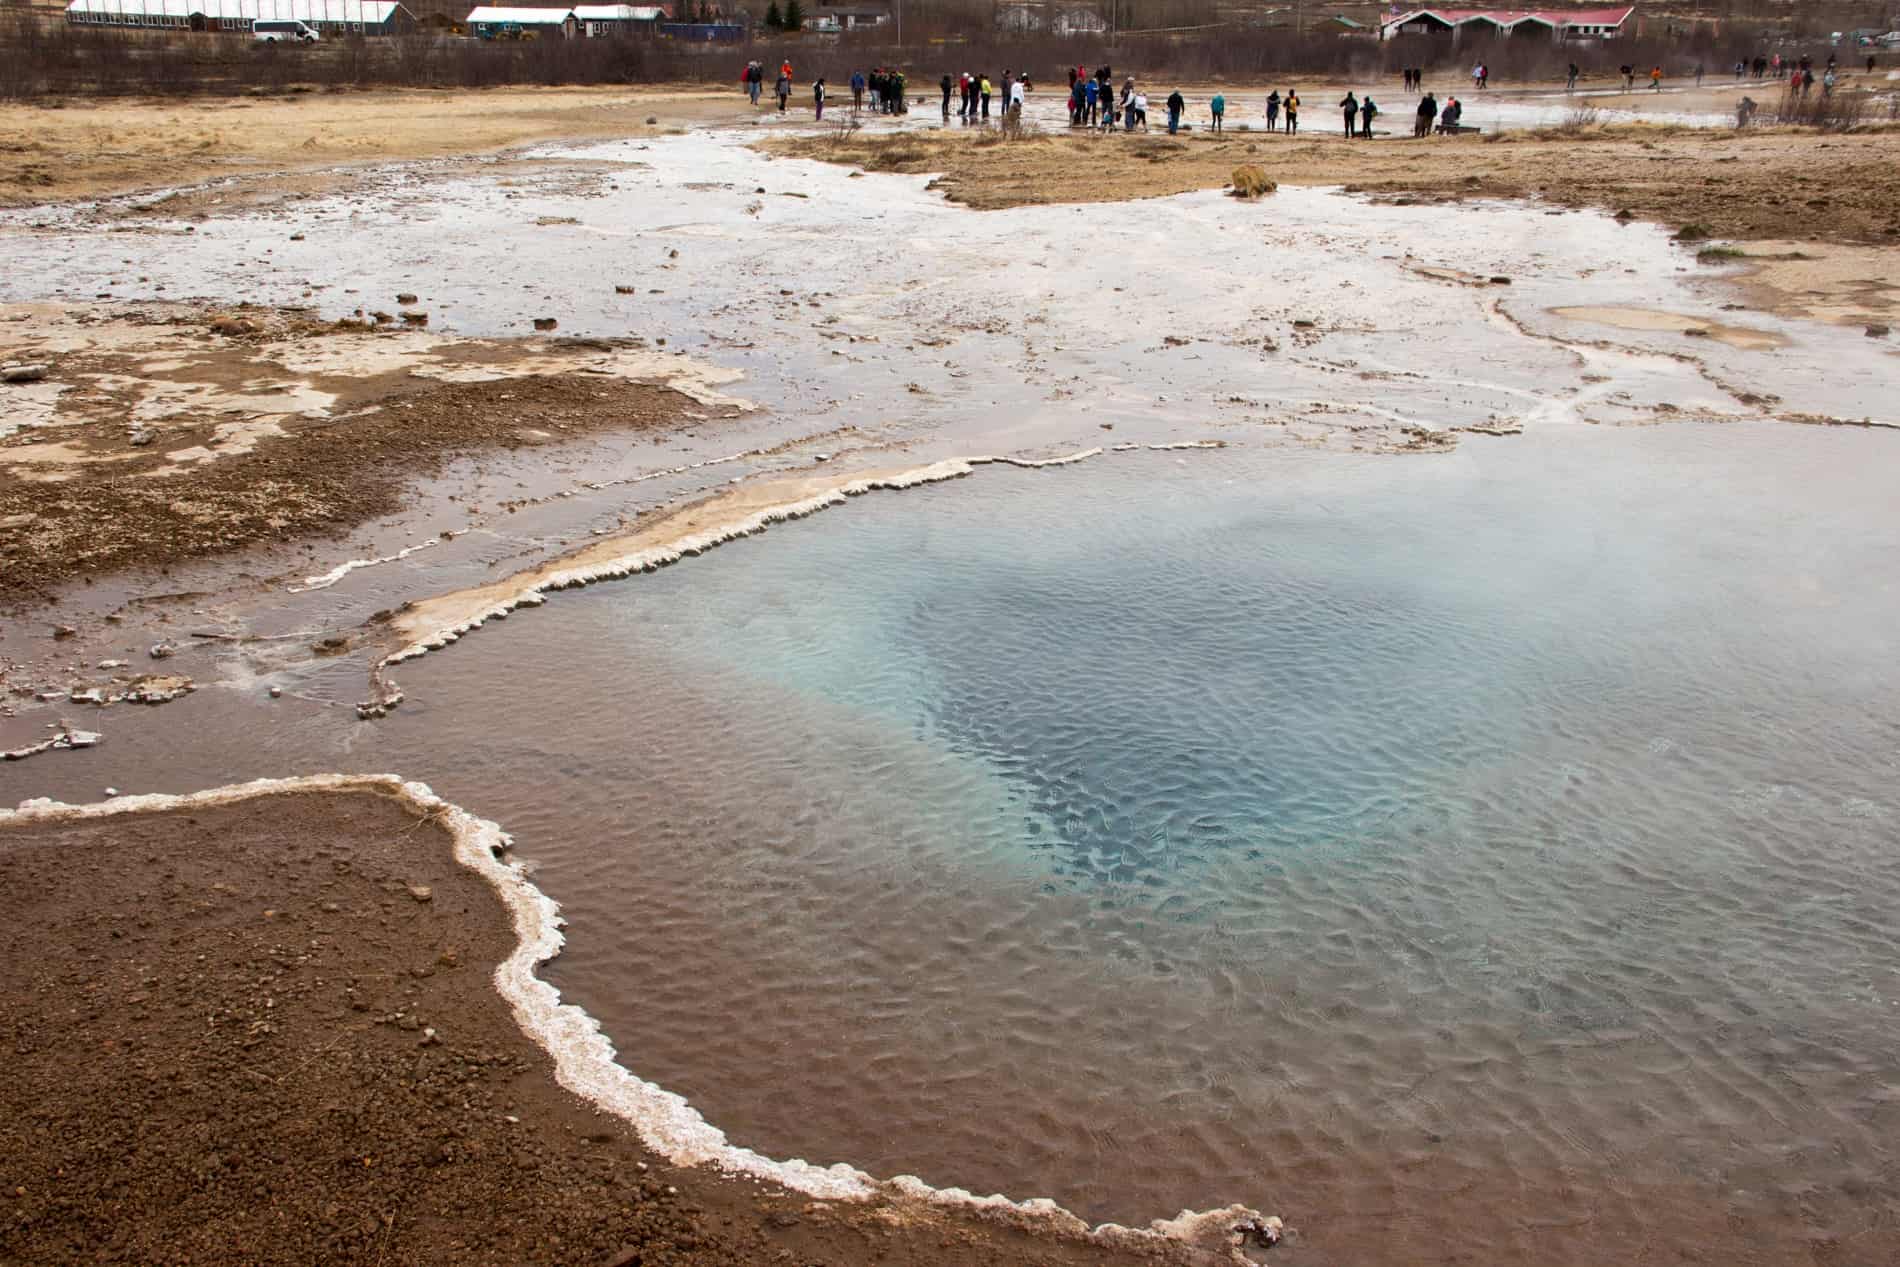 People standing near to the blue geothermal Geysir pool waters in a geothermal area in Iceland.